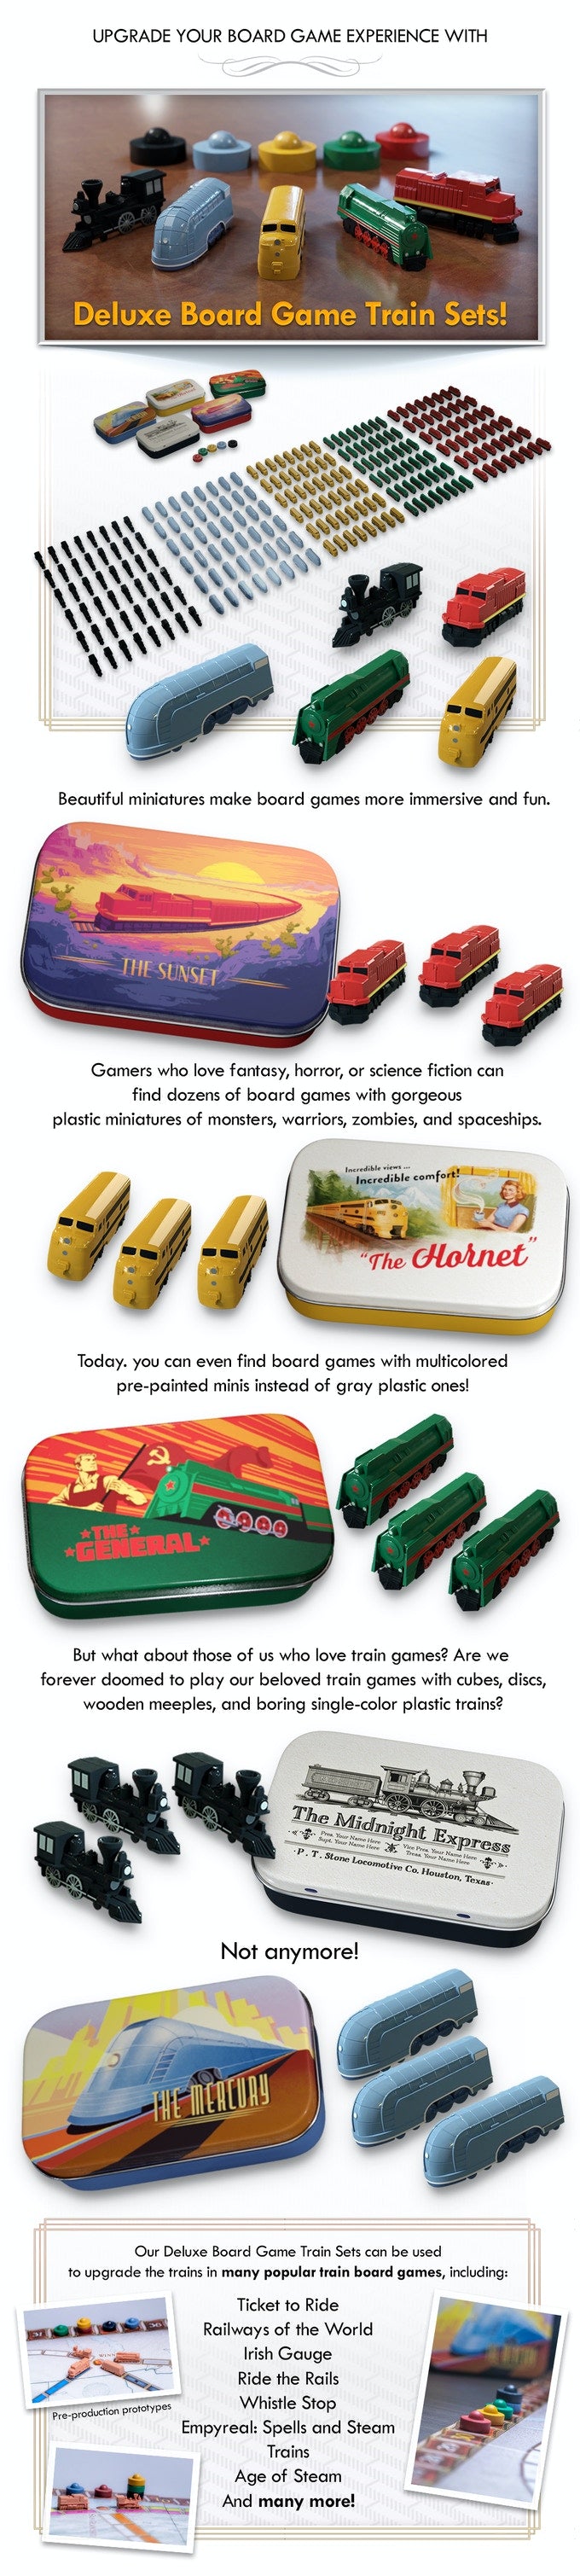 Little Plastic Train Company Deluxe Board Game Train Sets: The Sunset